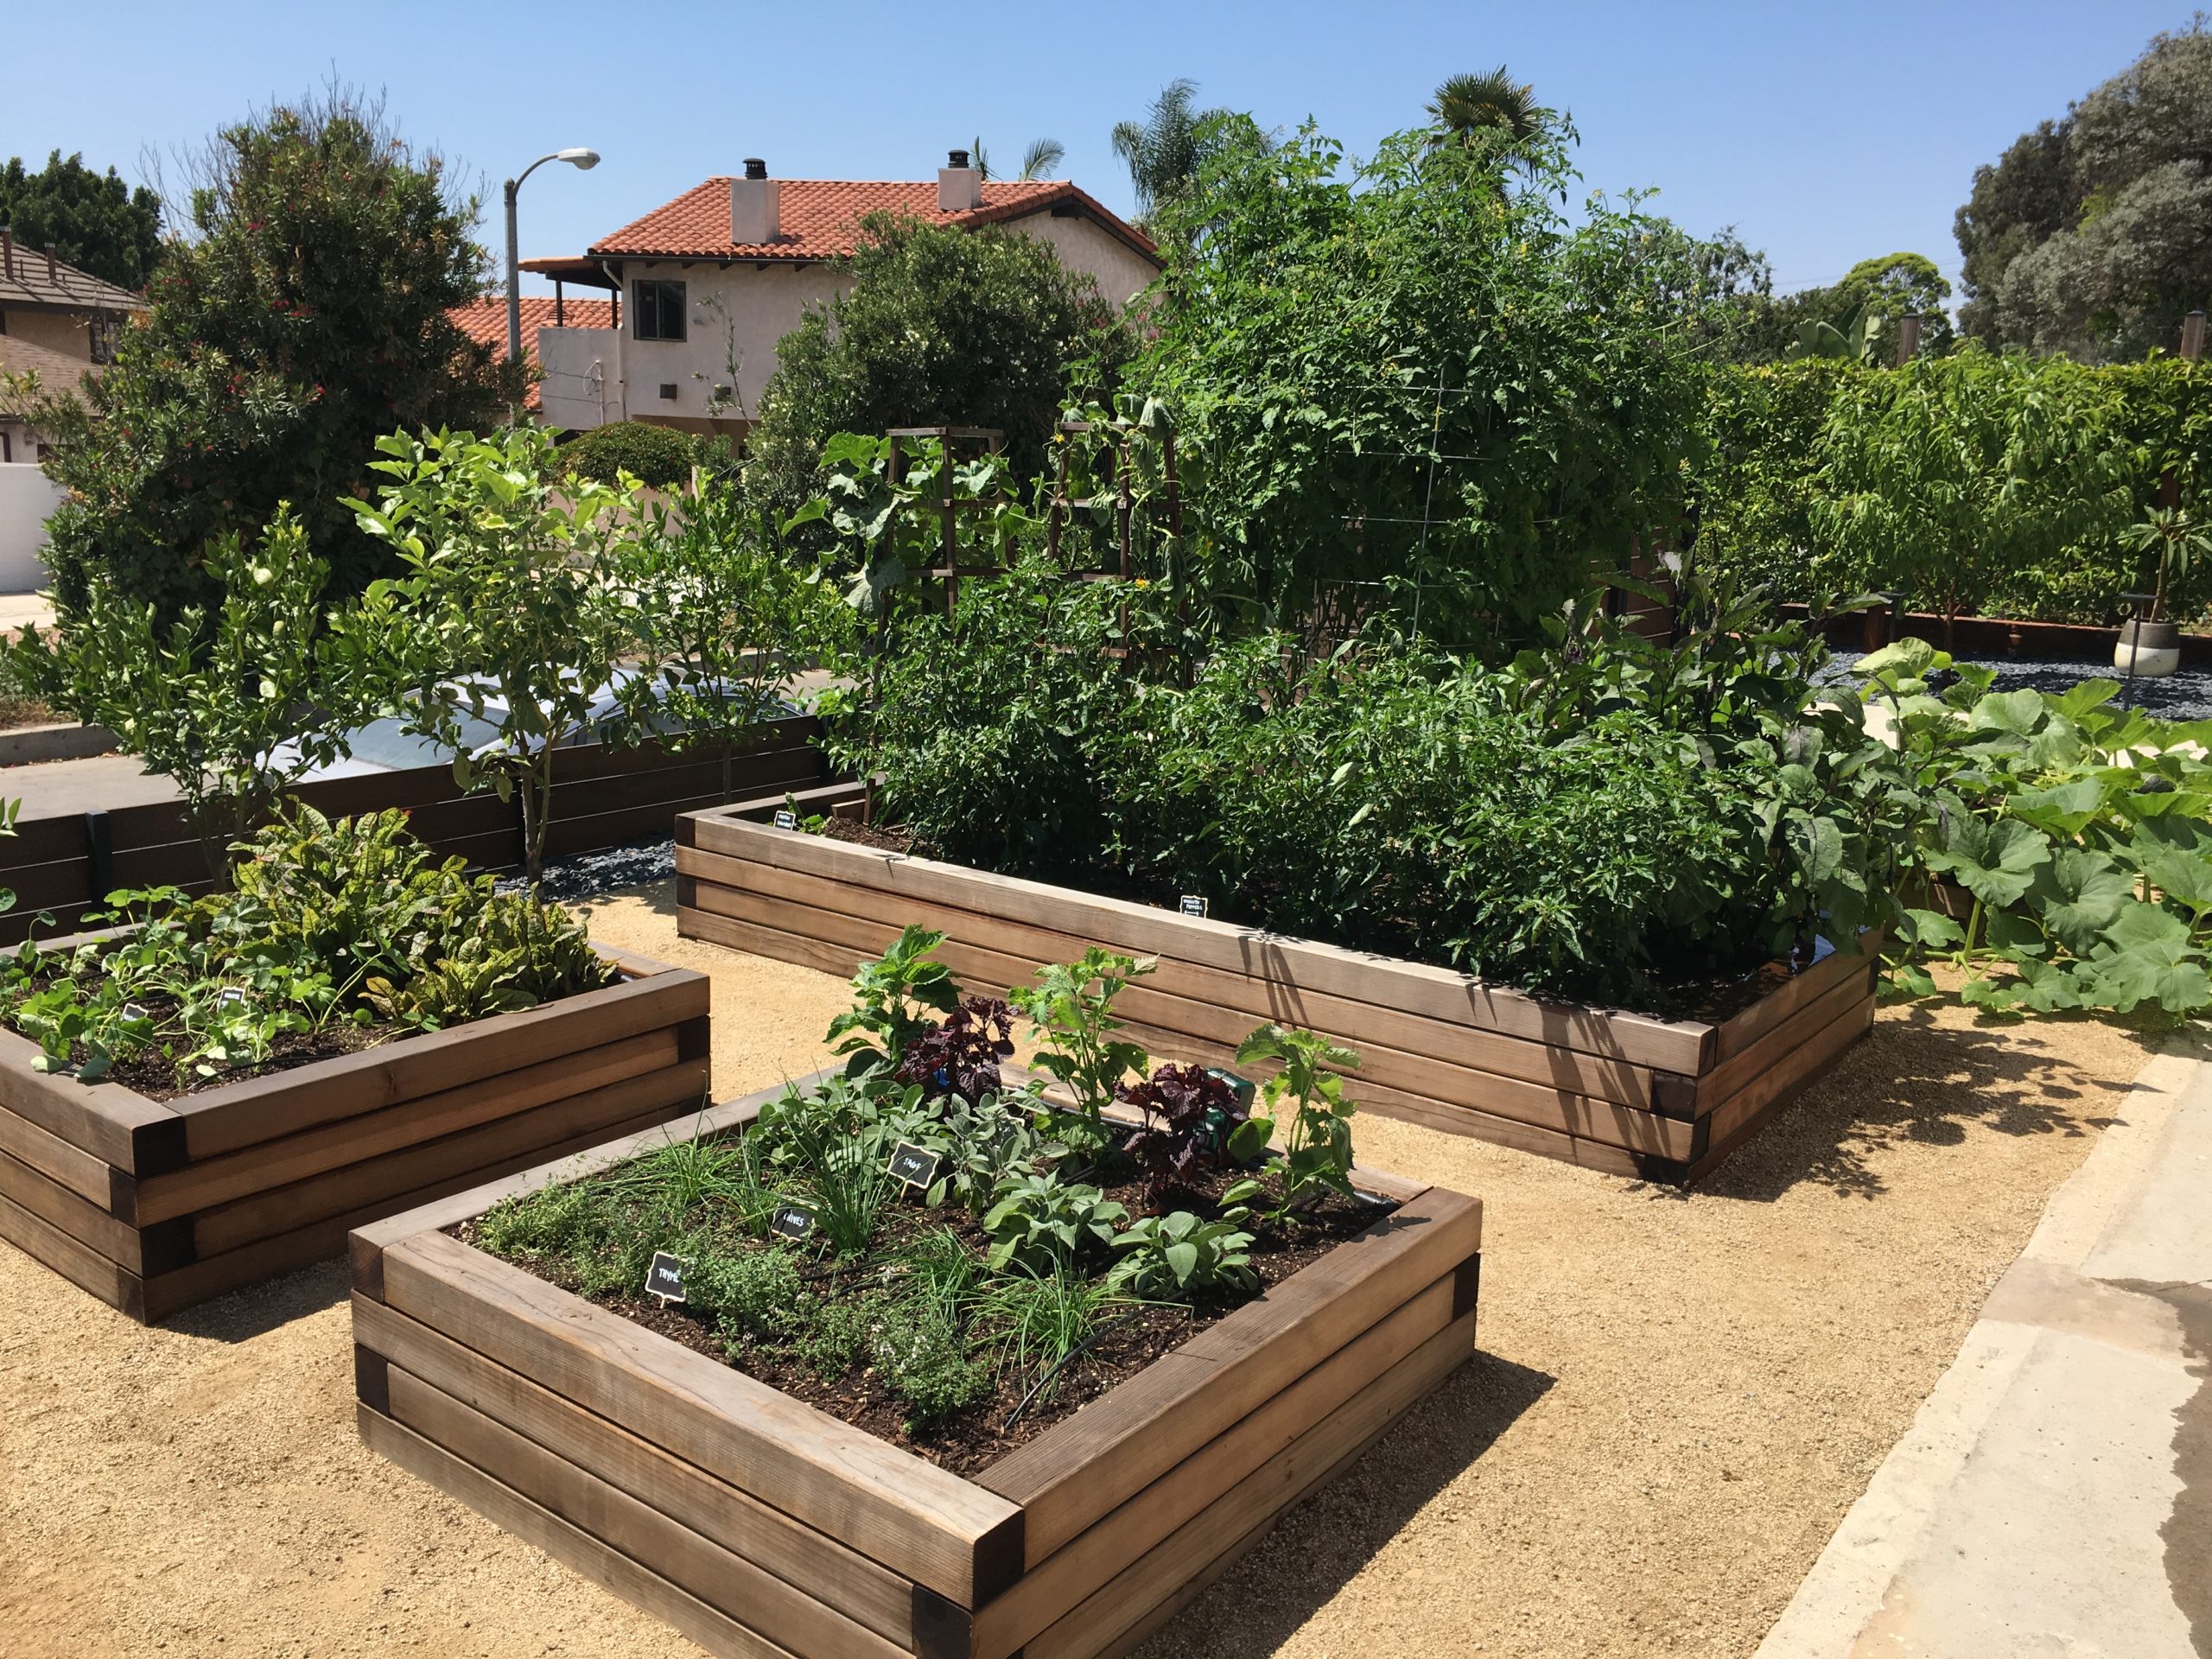 Sustainable Farming in Southern California